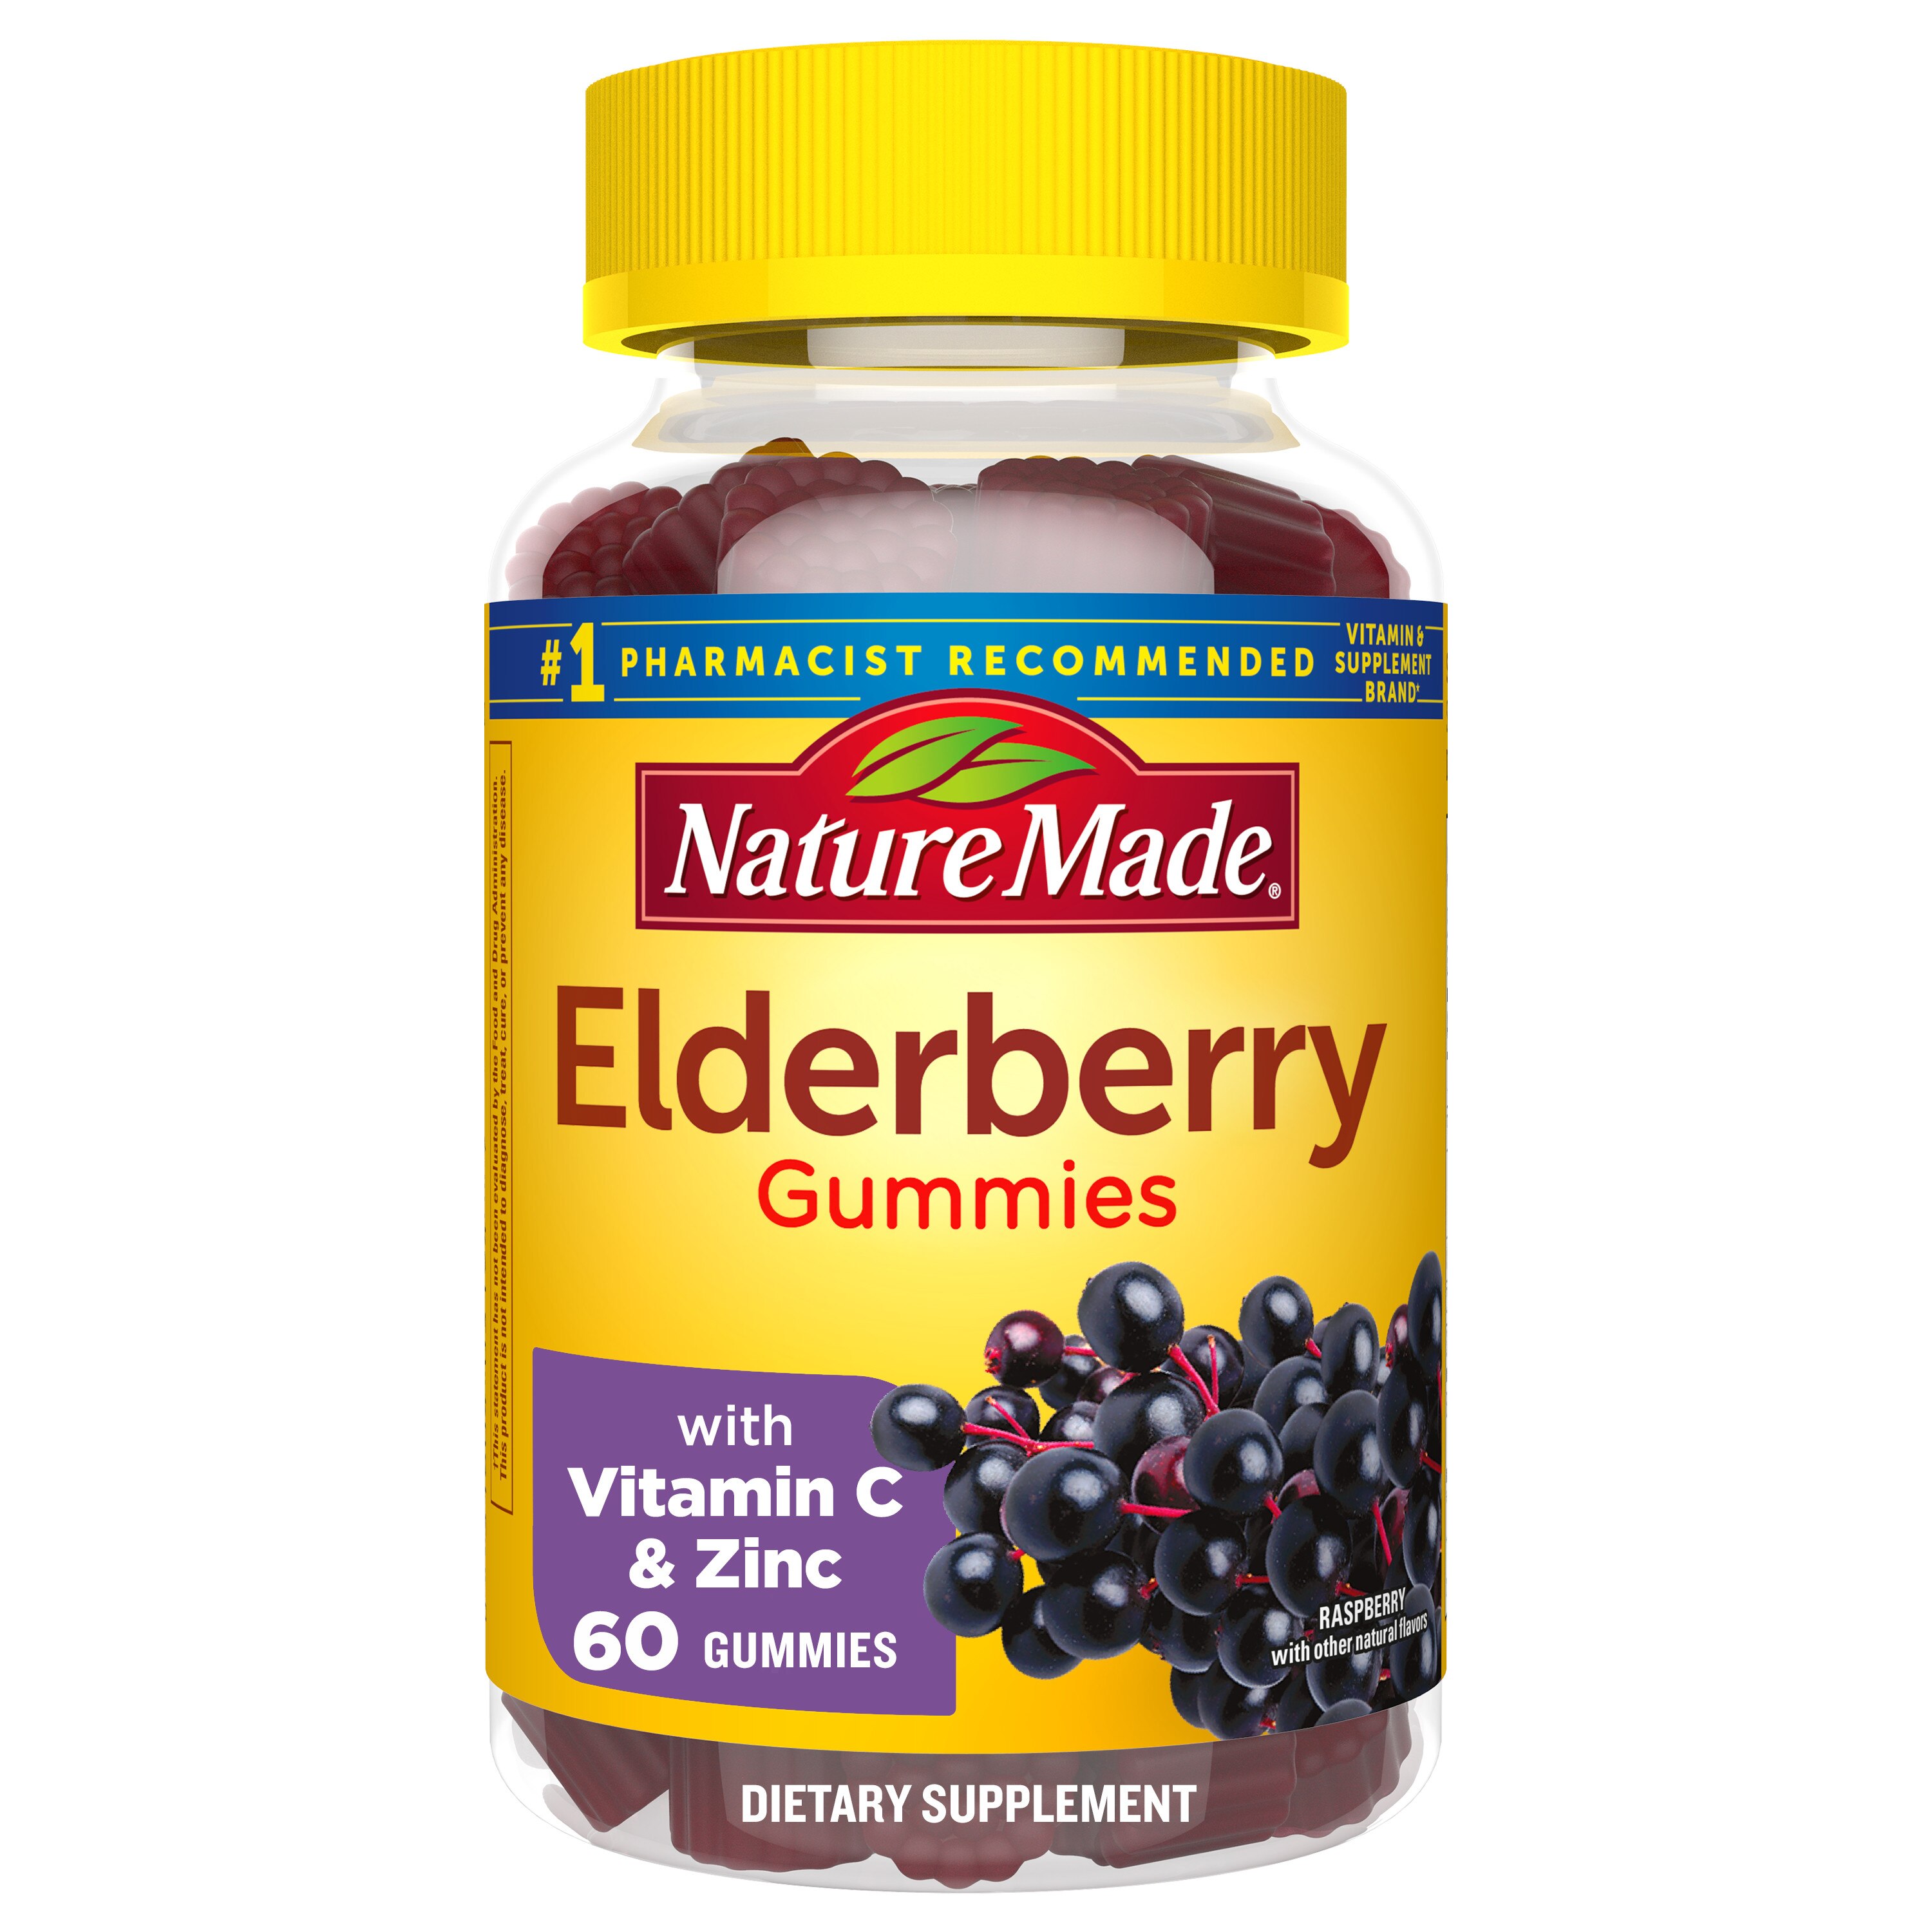 Nature Made Elderberry with Vitamin C and Zinc Gummies, 60 CT